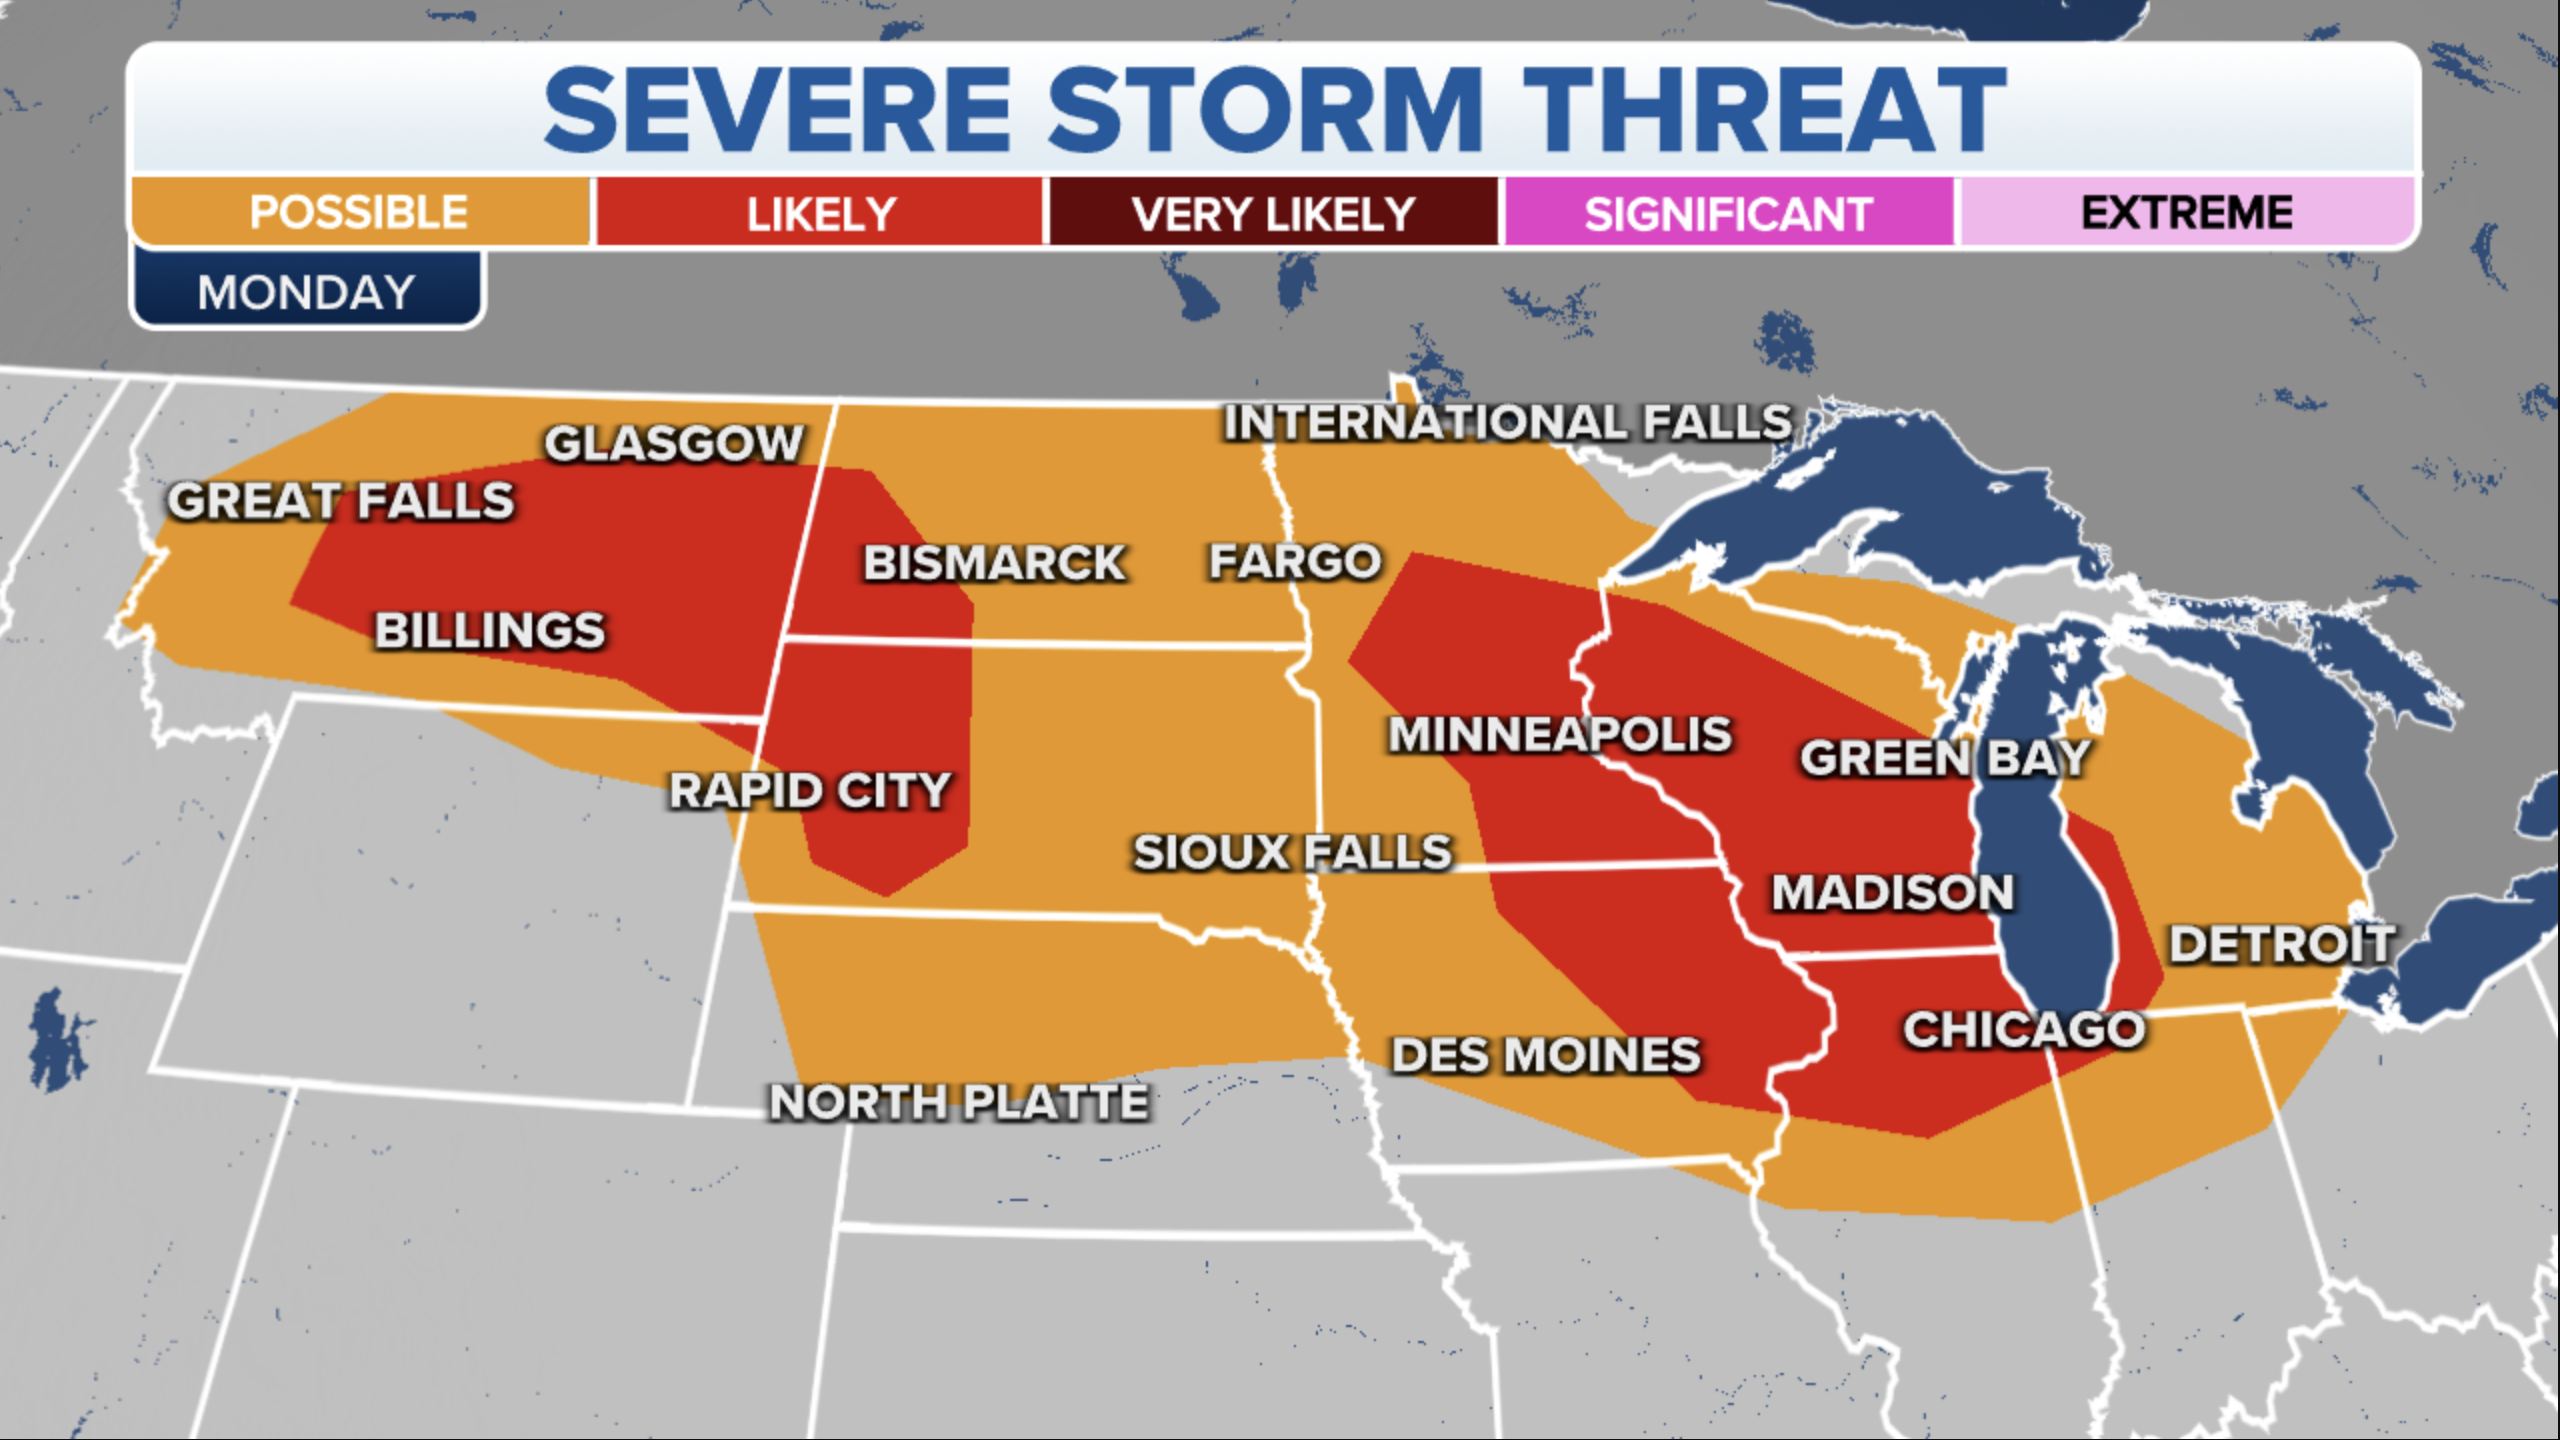 Severe storms are likely in several parts of the Midwest.